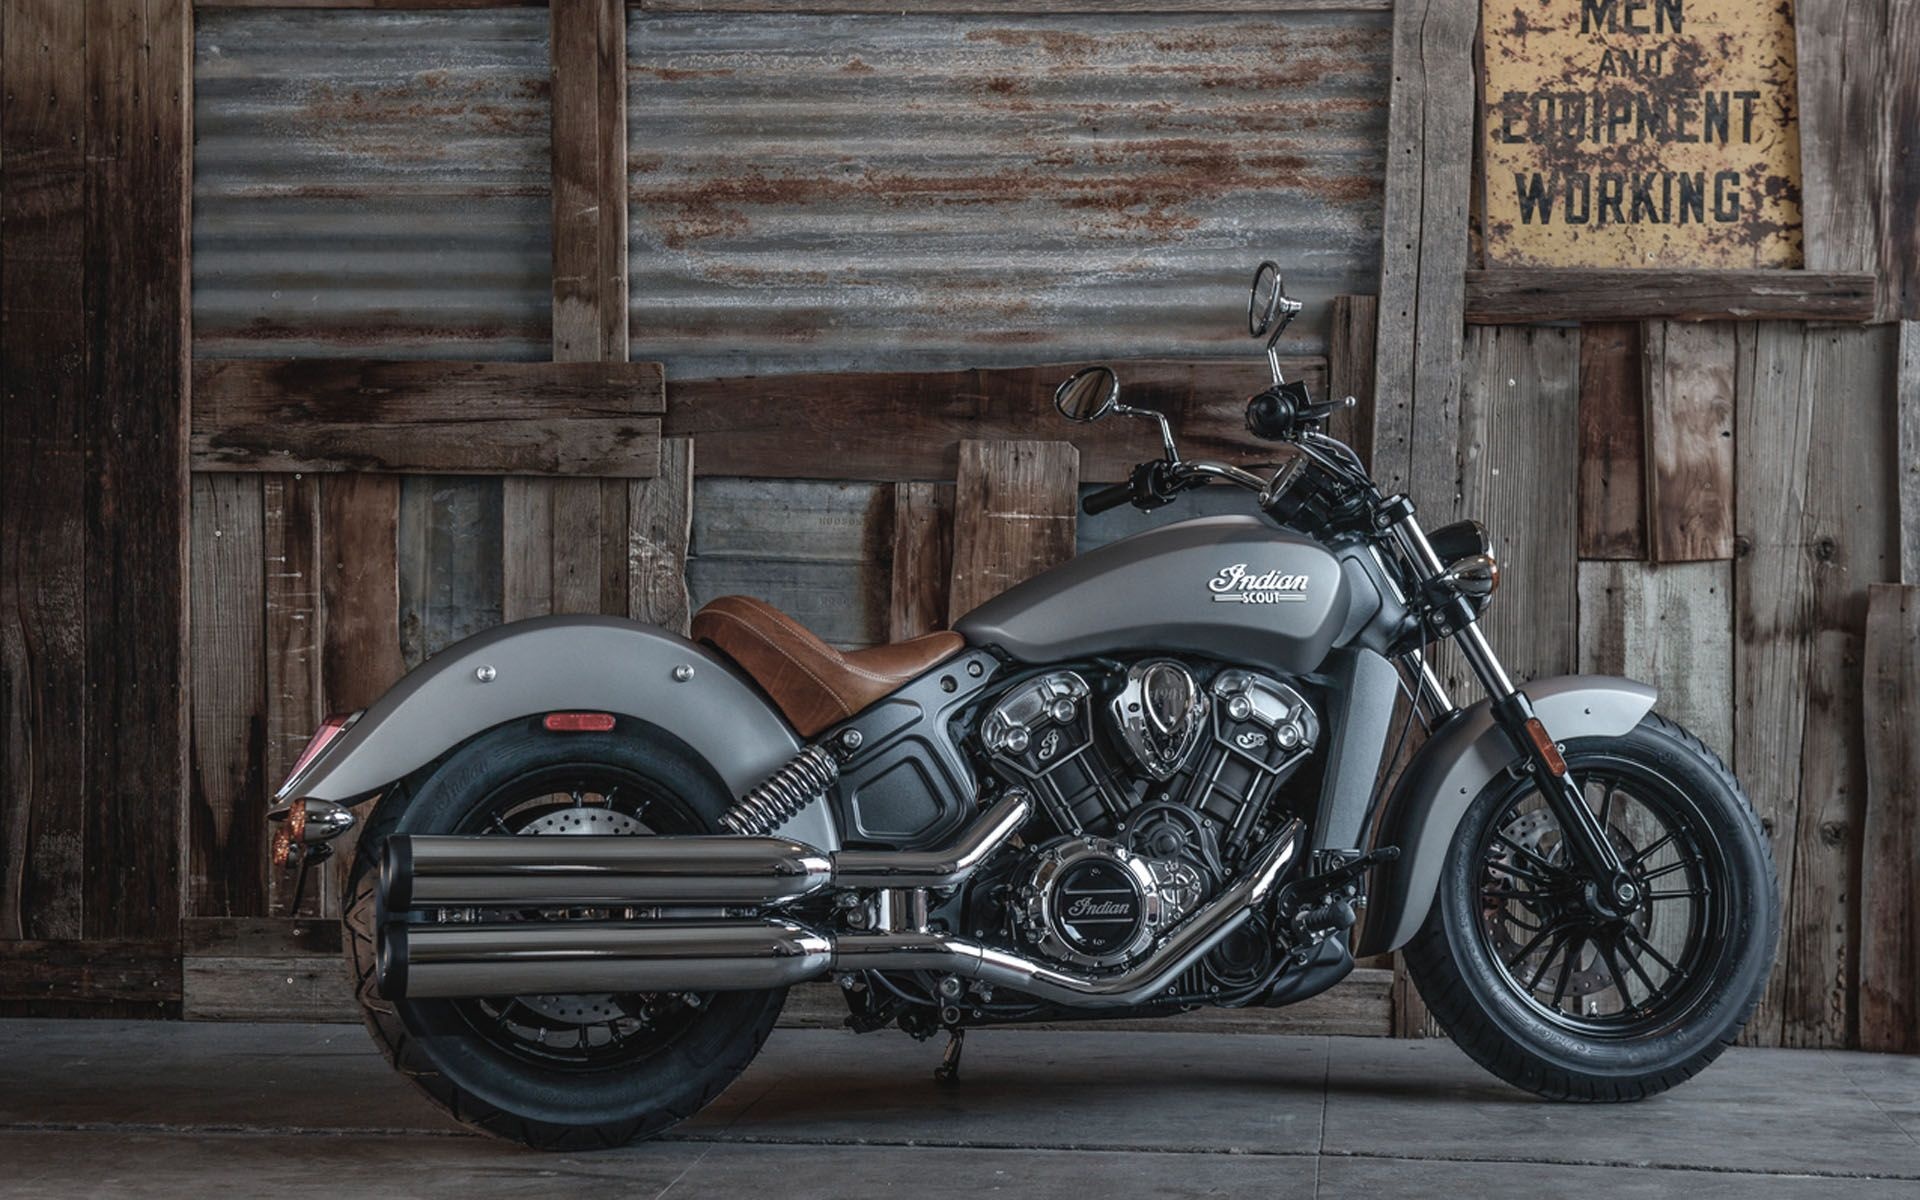 Indian Scout Sixty, Auto industry, Bobber wallpapers, Indian motorcycle, 1920x1200 HD Desktop